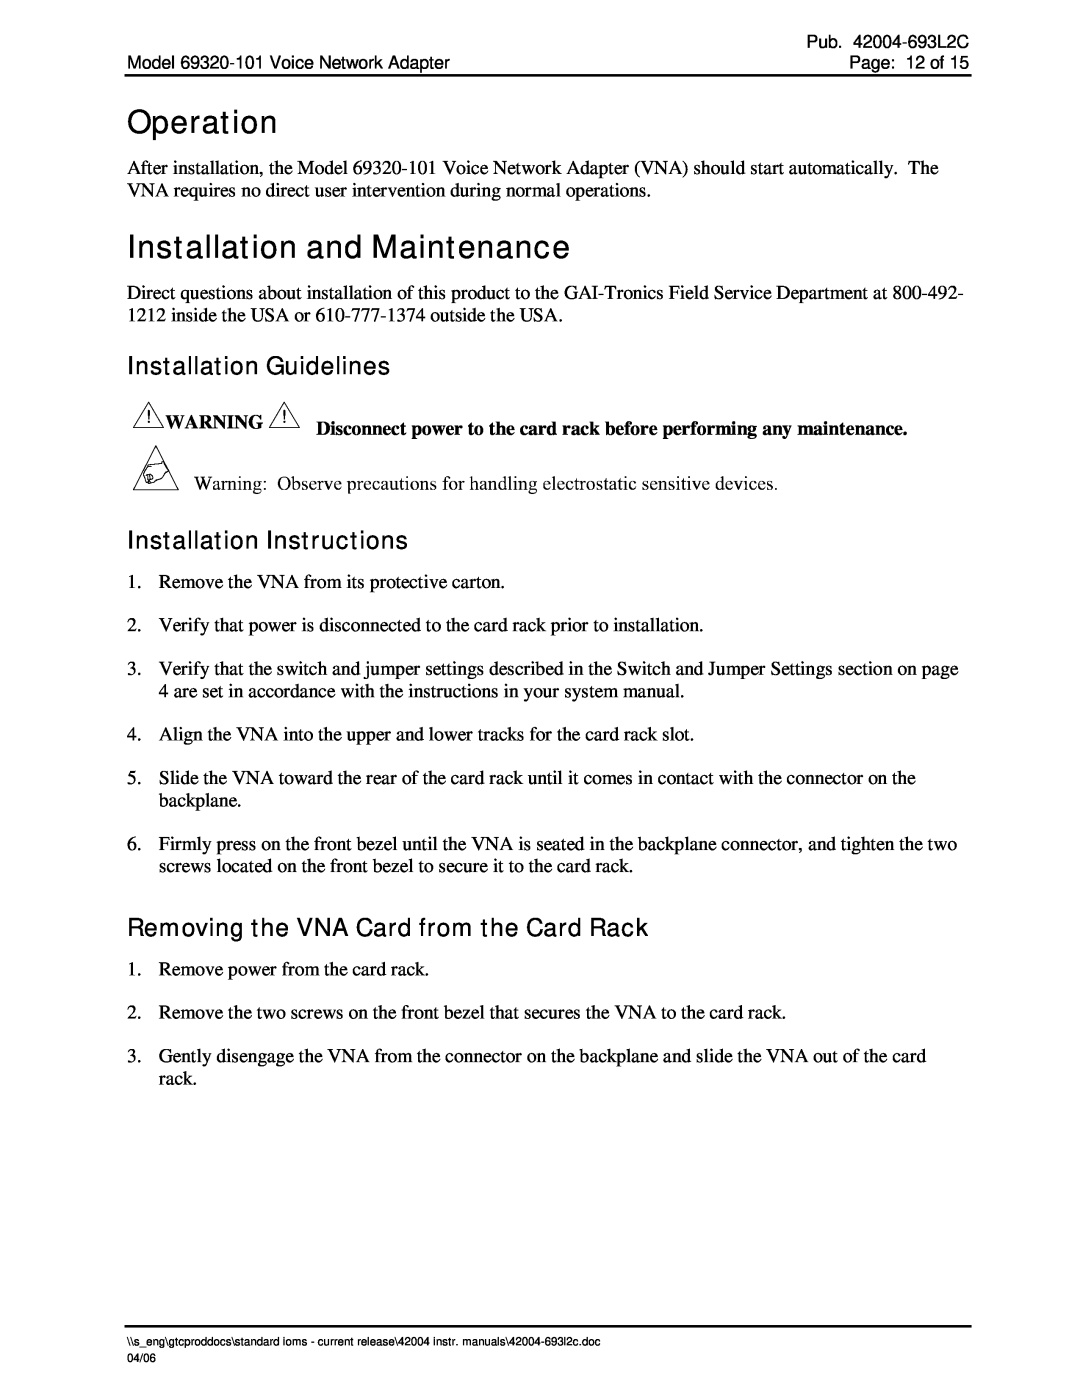 Hubbell 69320-101 manual Operation, Installation and Maintenance, Installation Guidelines, Installation Instructions 